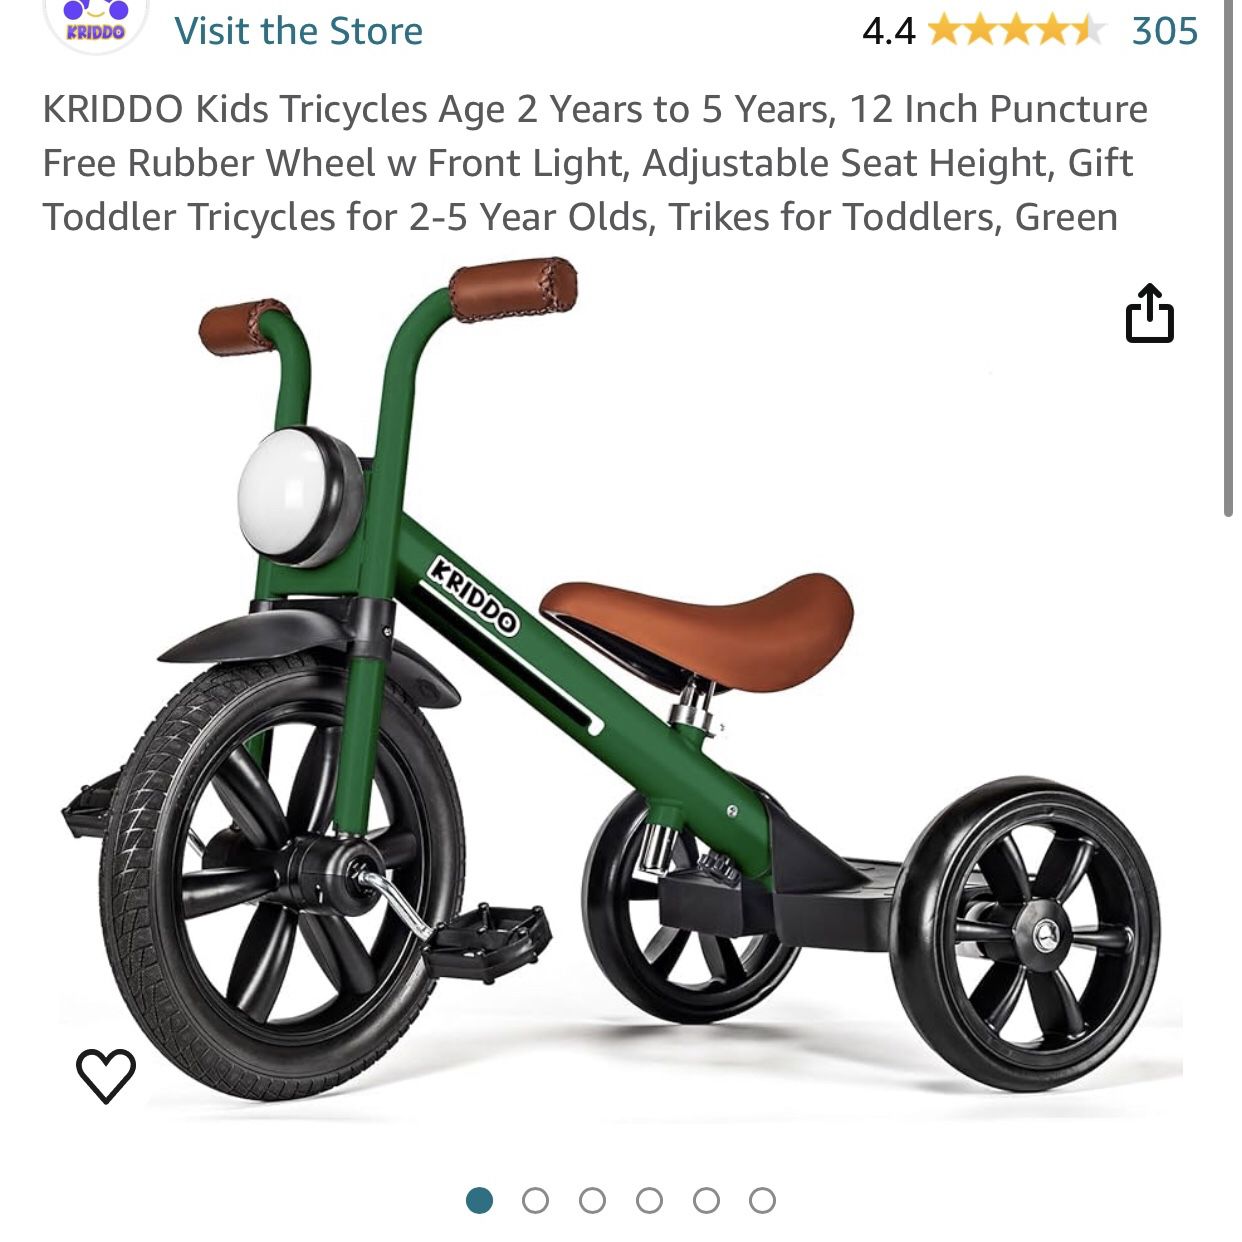 KRIDDO Kids Tricycles Age 2 Years to 5 Years